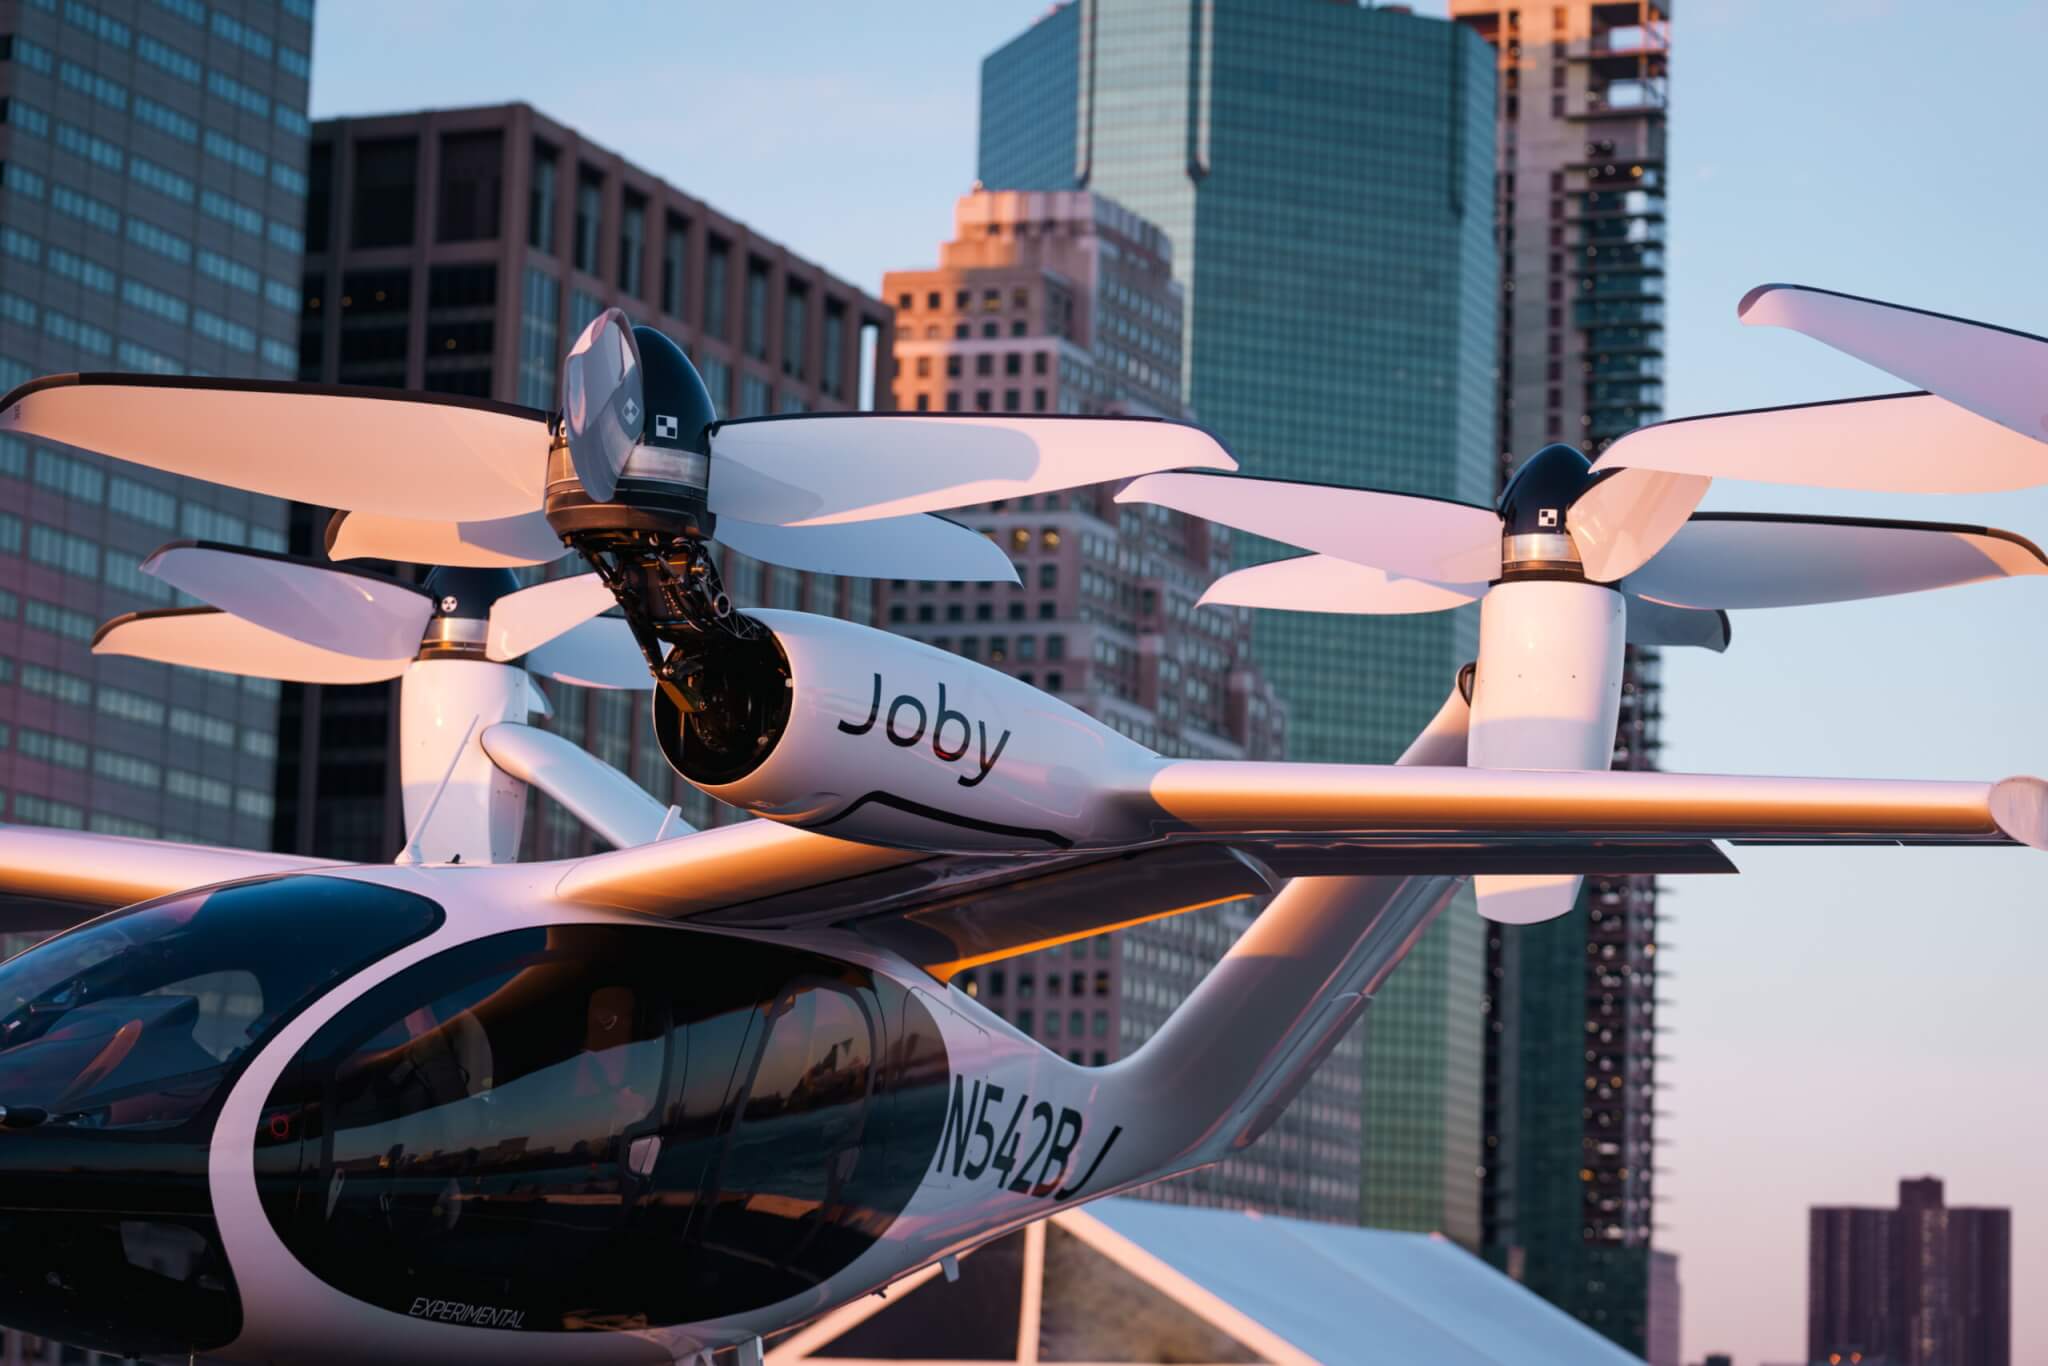 A close-up view of Joby's Electric Air Taxi.